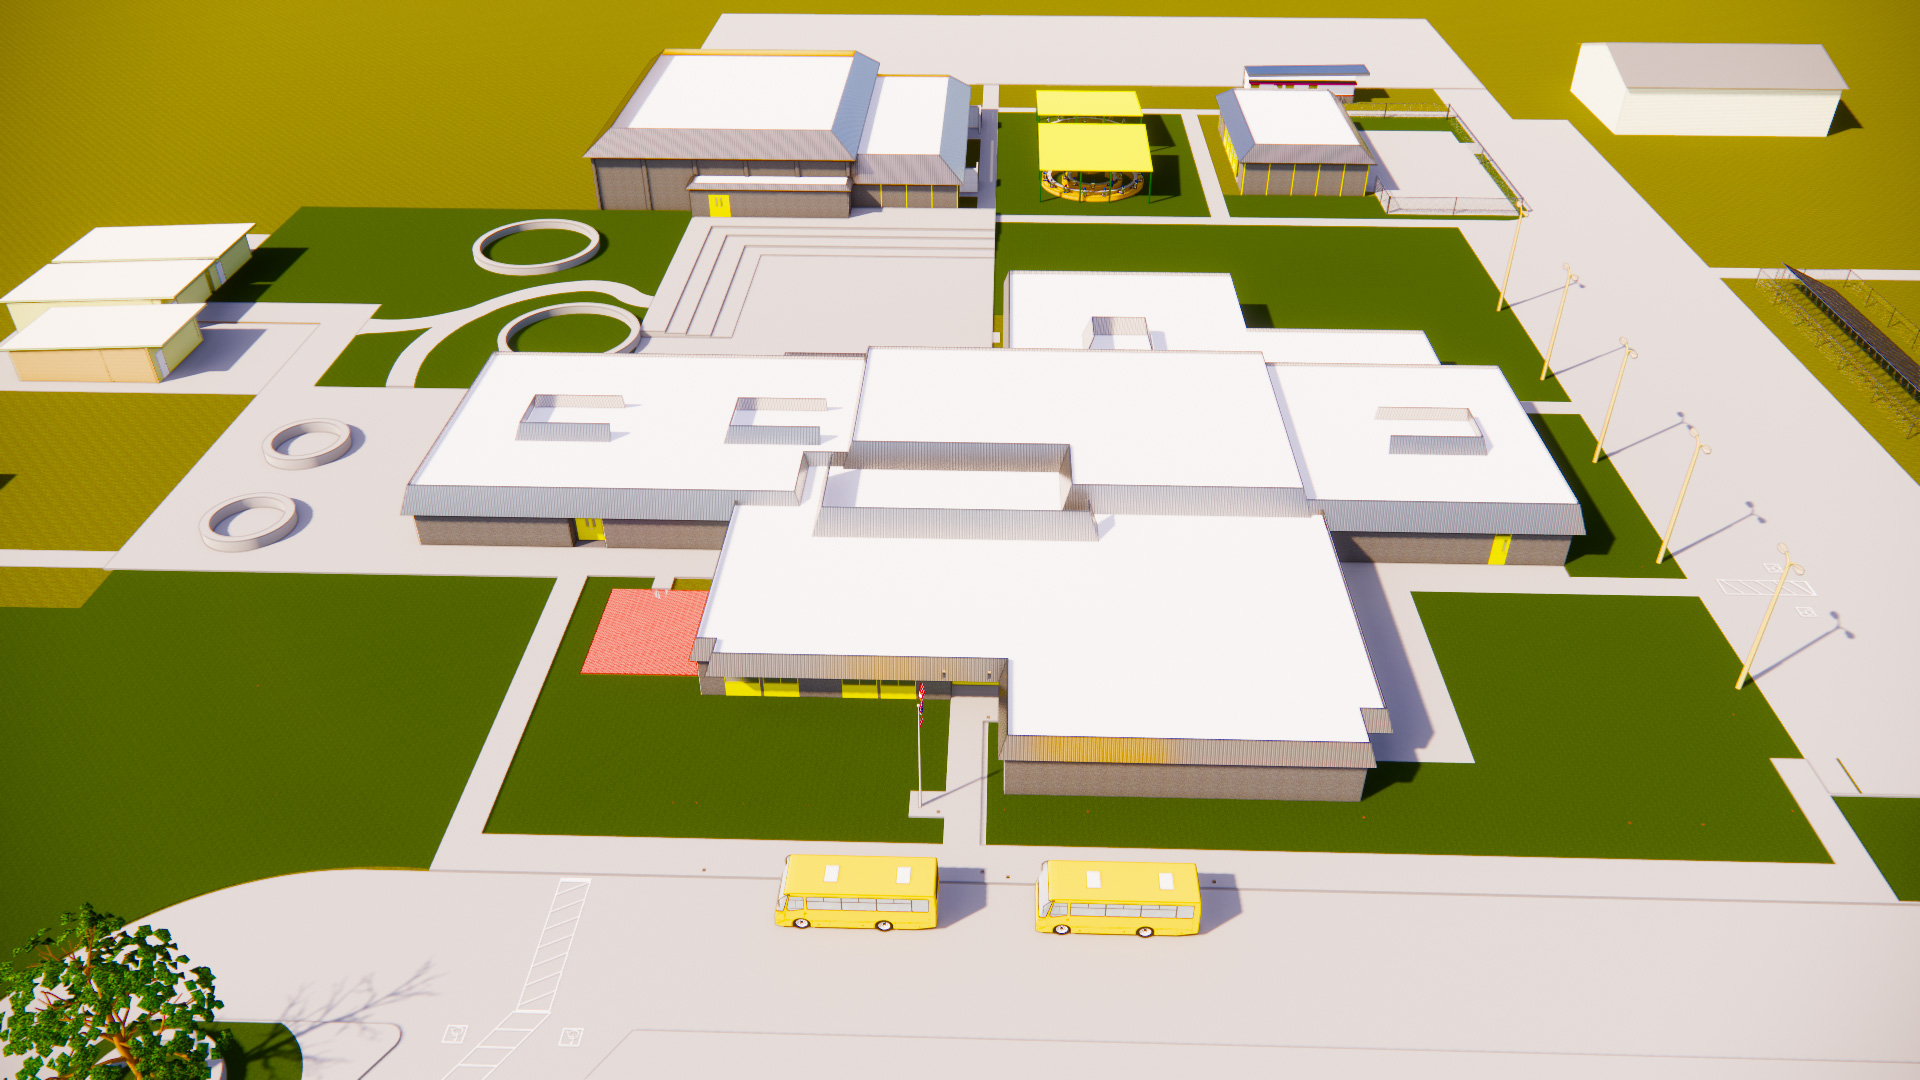 Rendering of campus, showing footprint of building to be modernized.